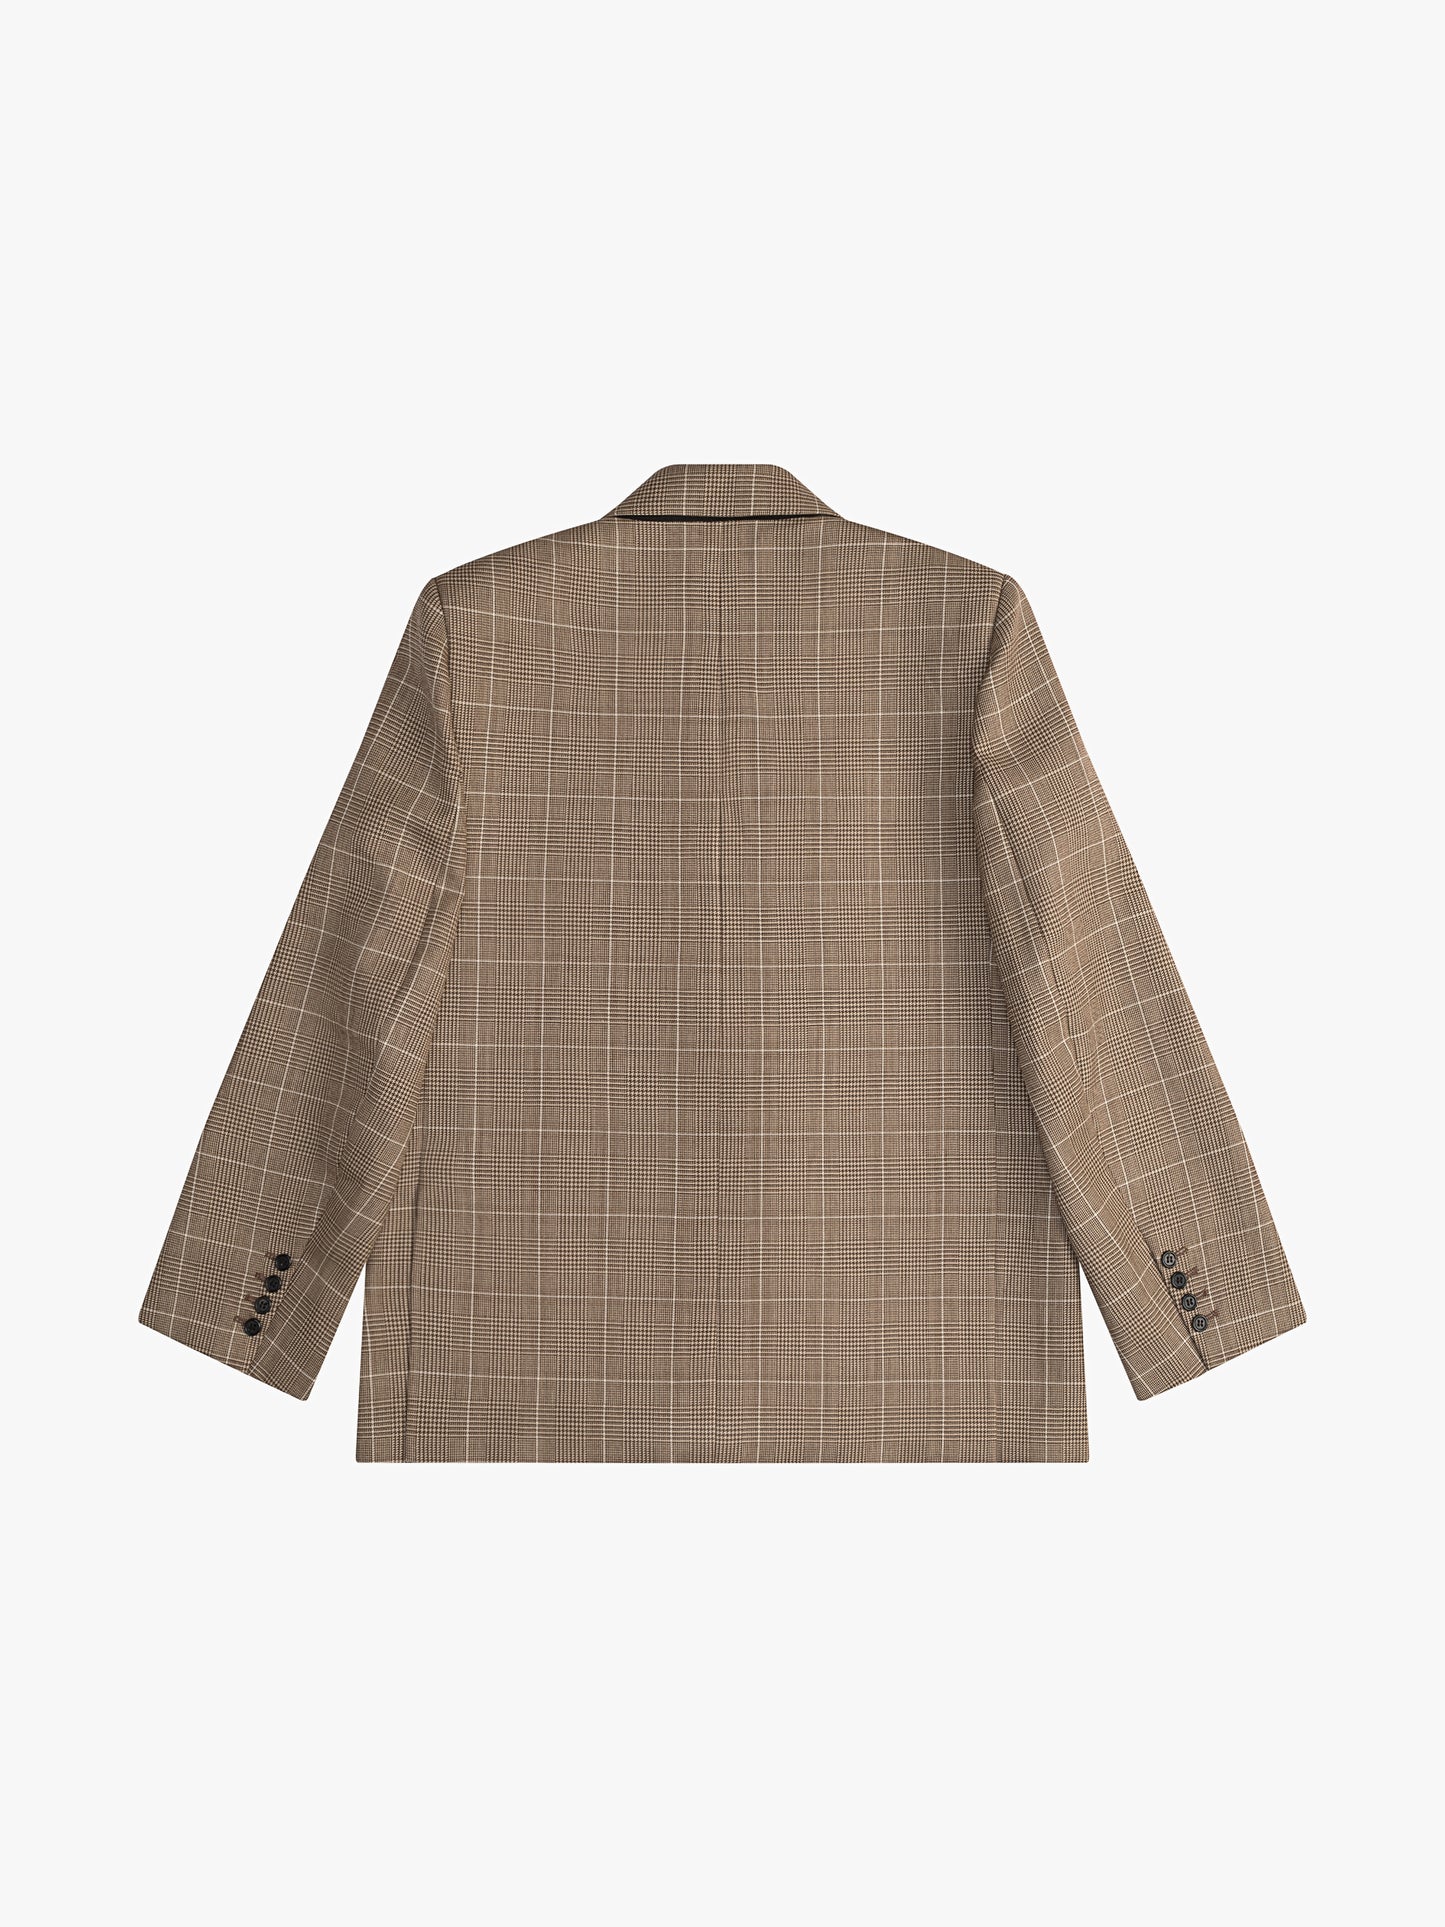 HOUNDSTOOTH SUIT JACKET